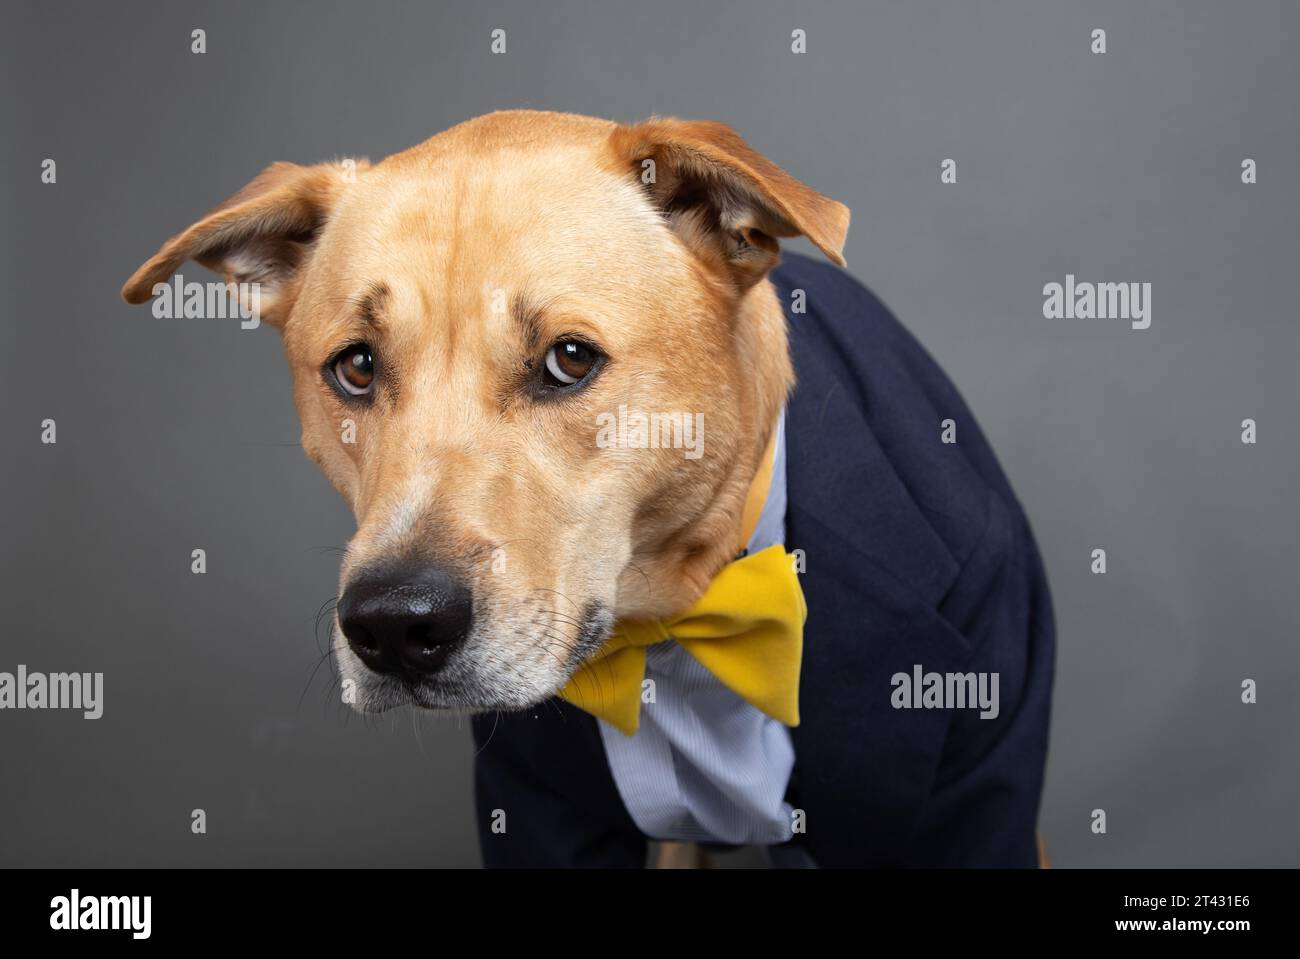 Portrait of an anxious labrador retriever mix dog dressed in a shirt, bow tie and jacket Stock Photo